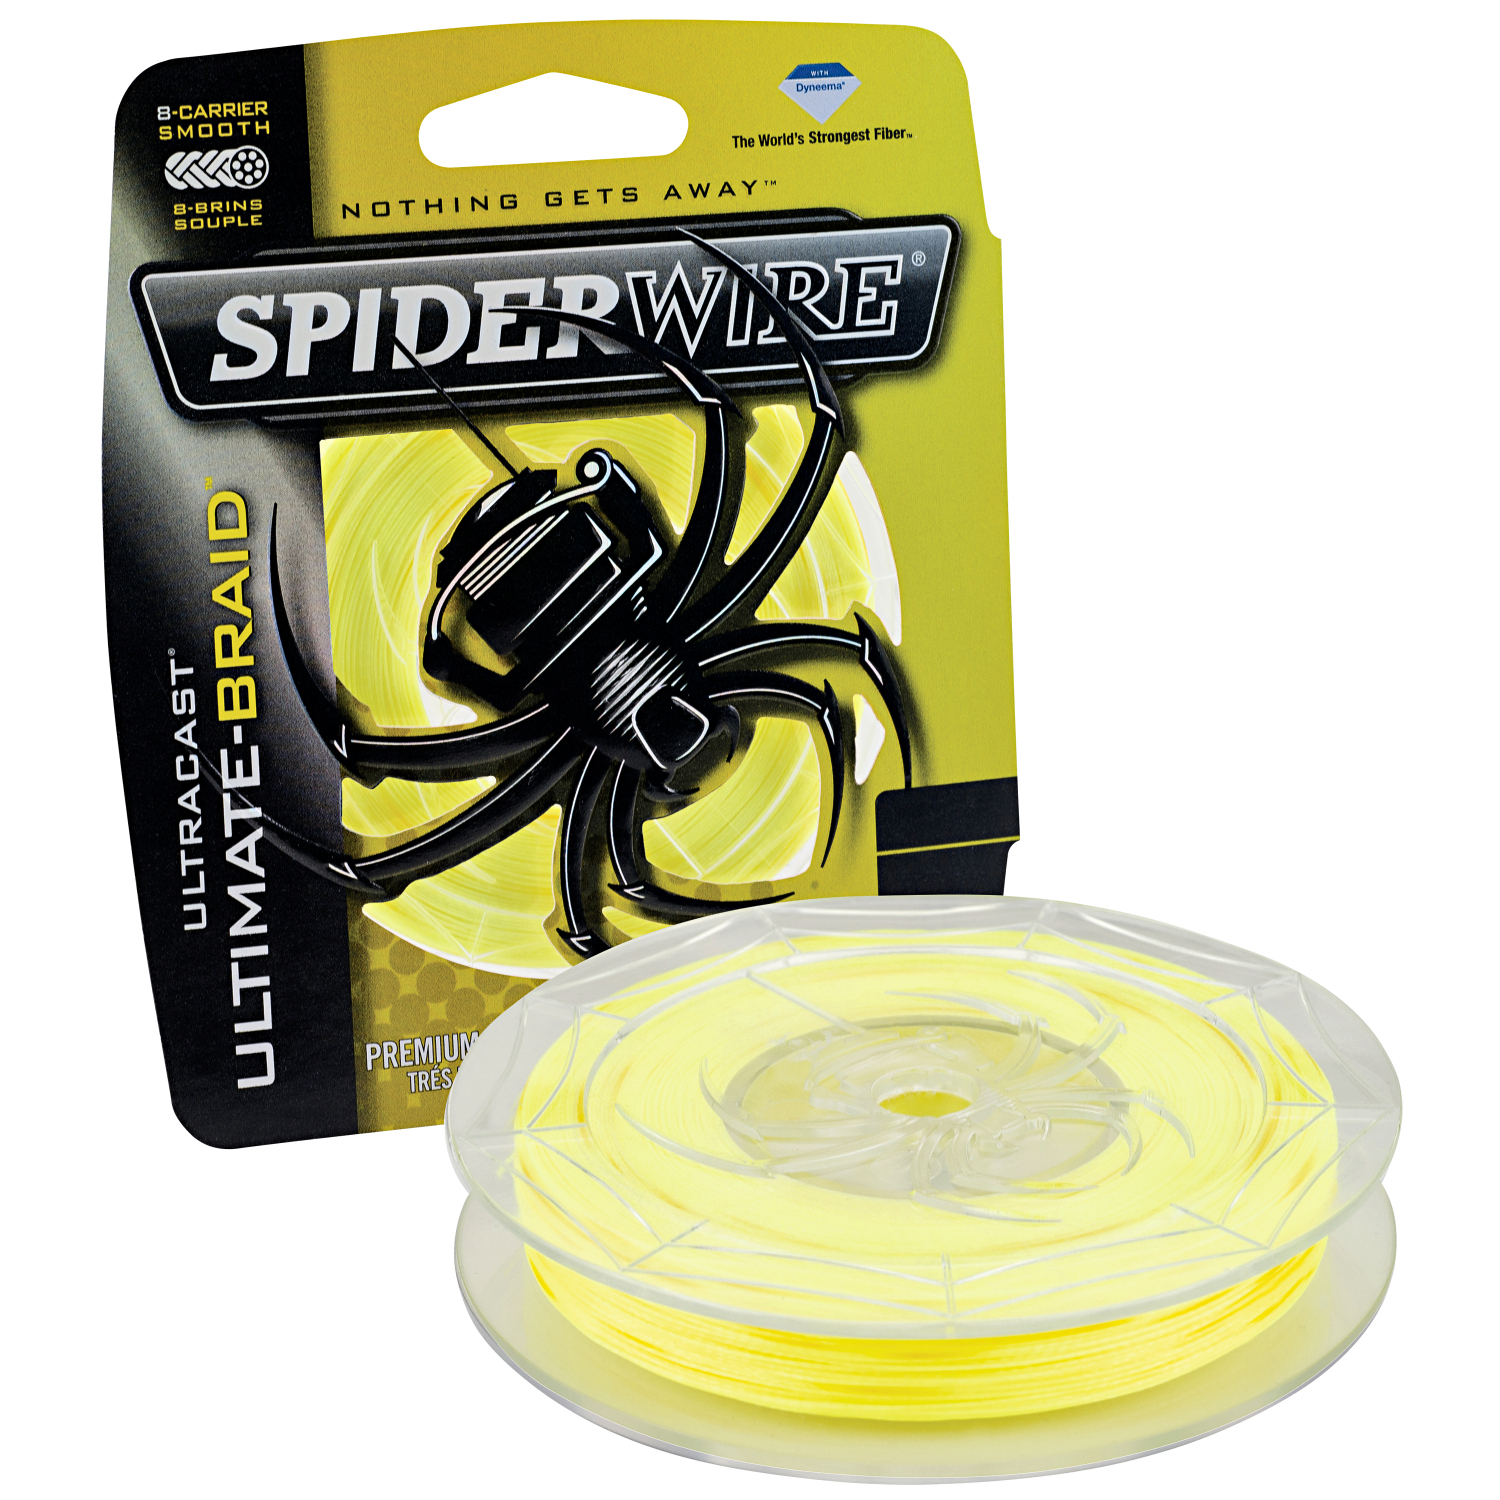 Spiderwire Fishing Line Ultracast 8 Carrier (yellow, 110 m) at low